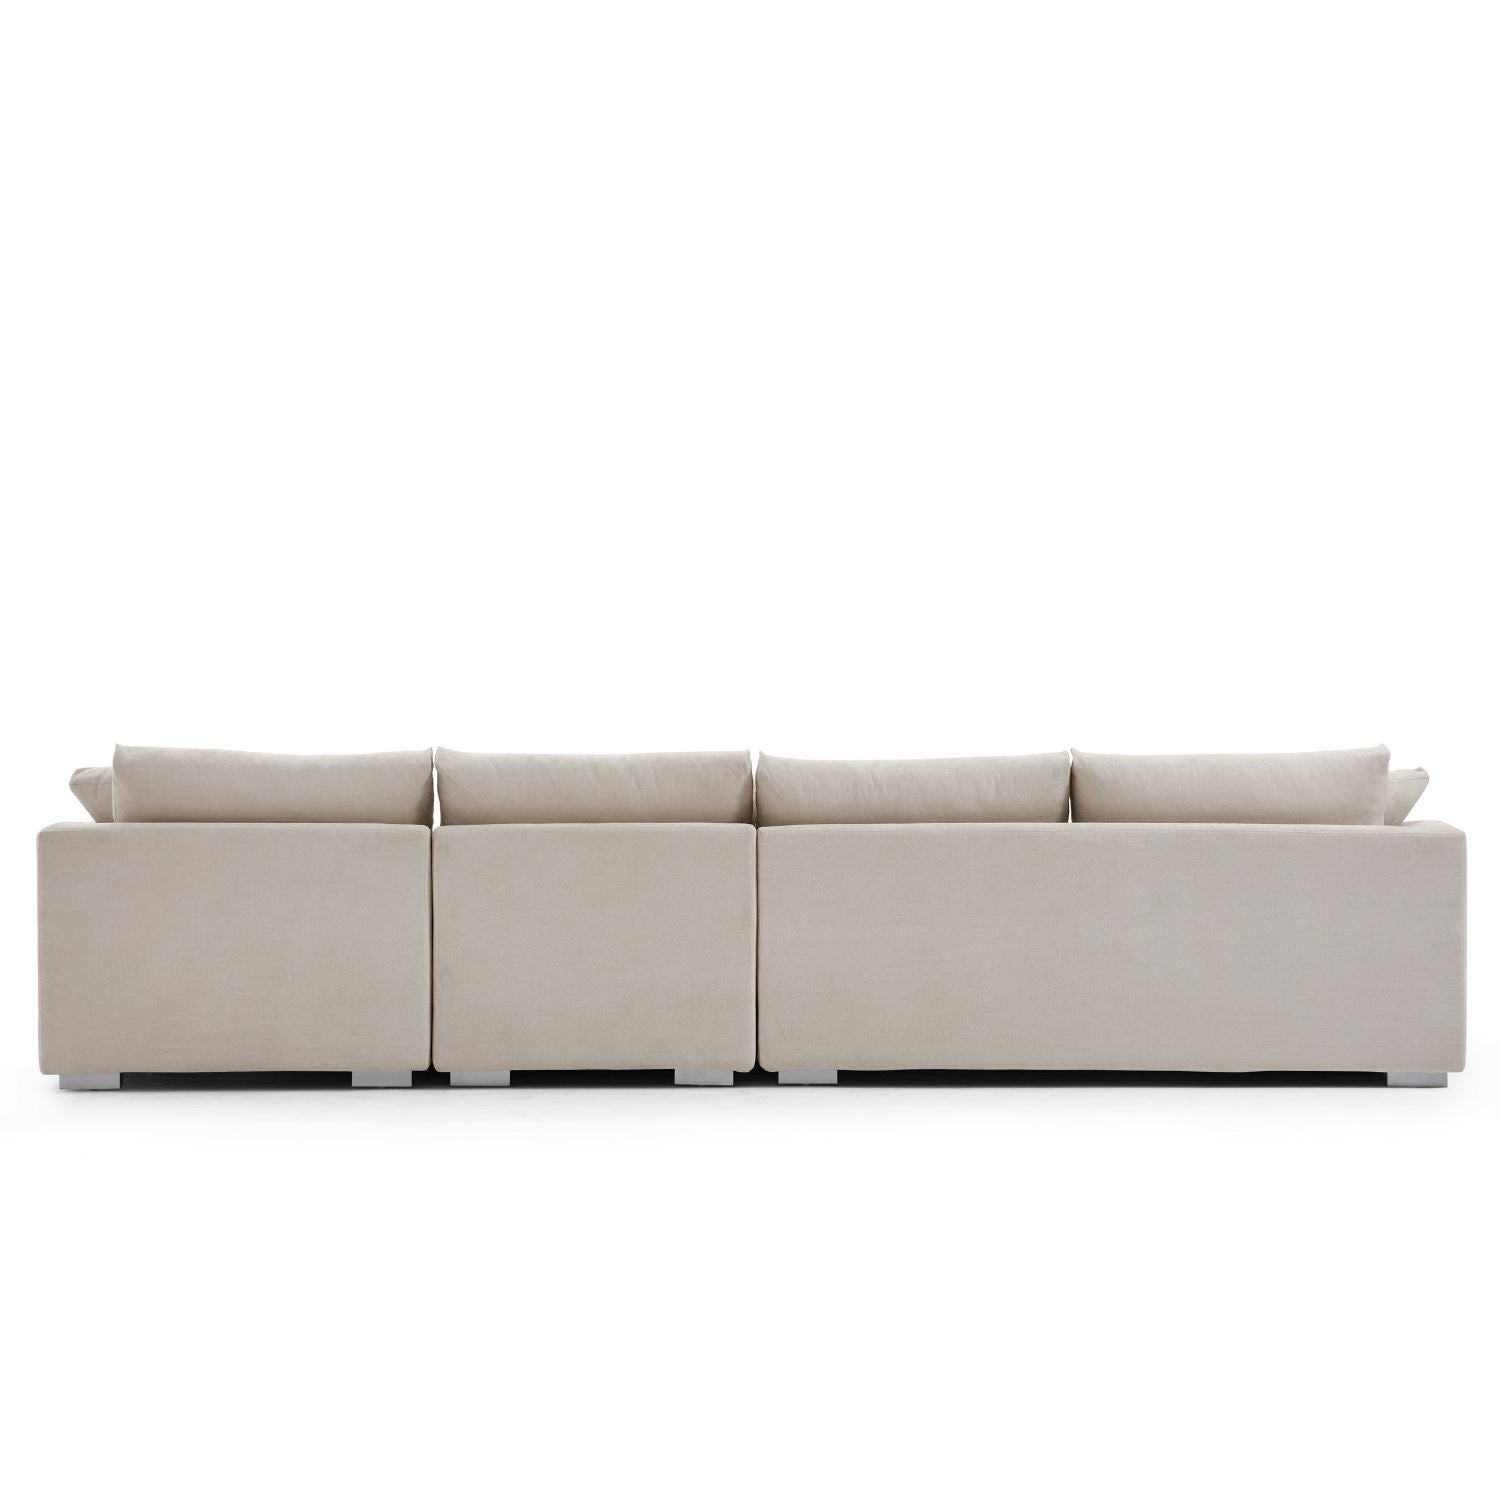 Feathers Sectional Sofa Mario Capasa Beige 110 inch Facing Right